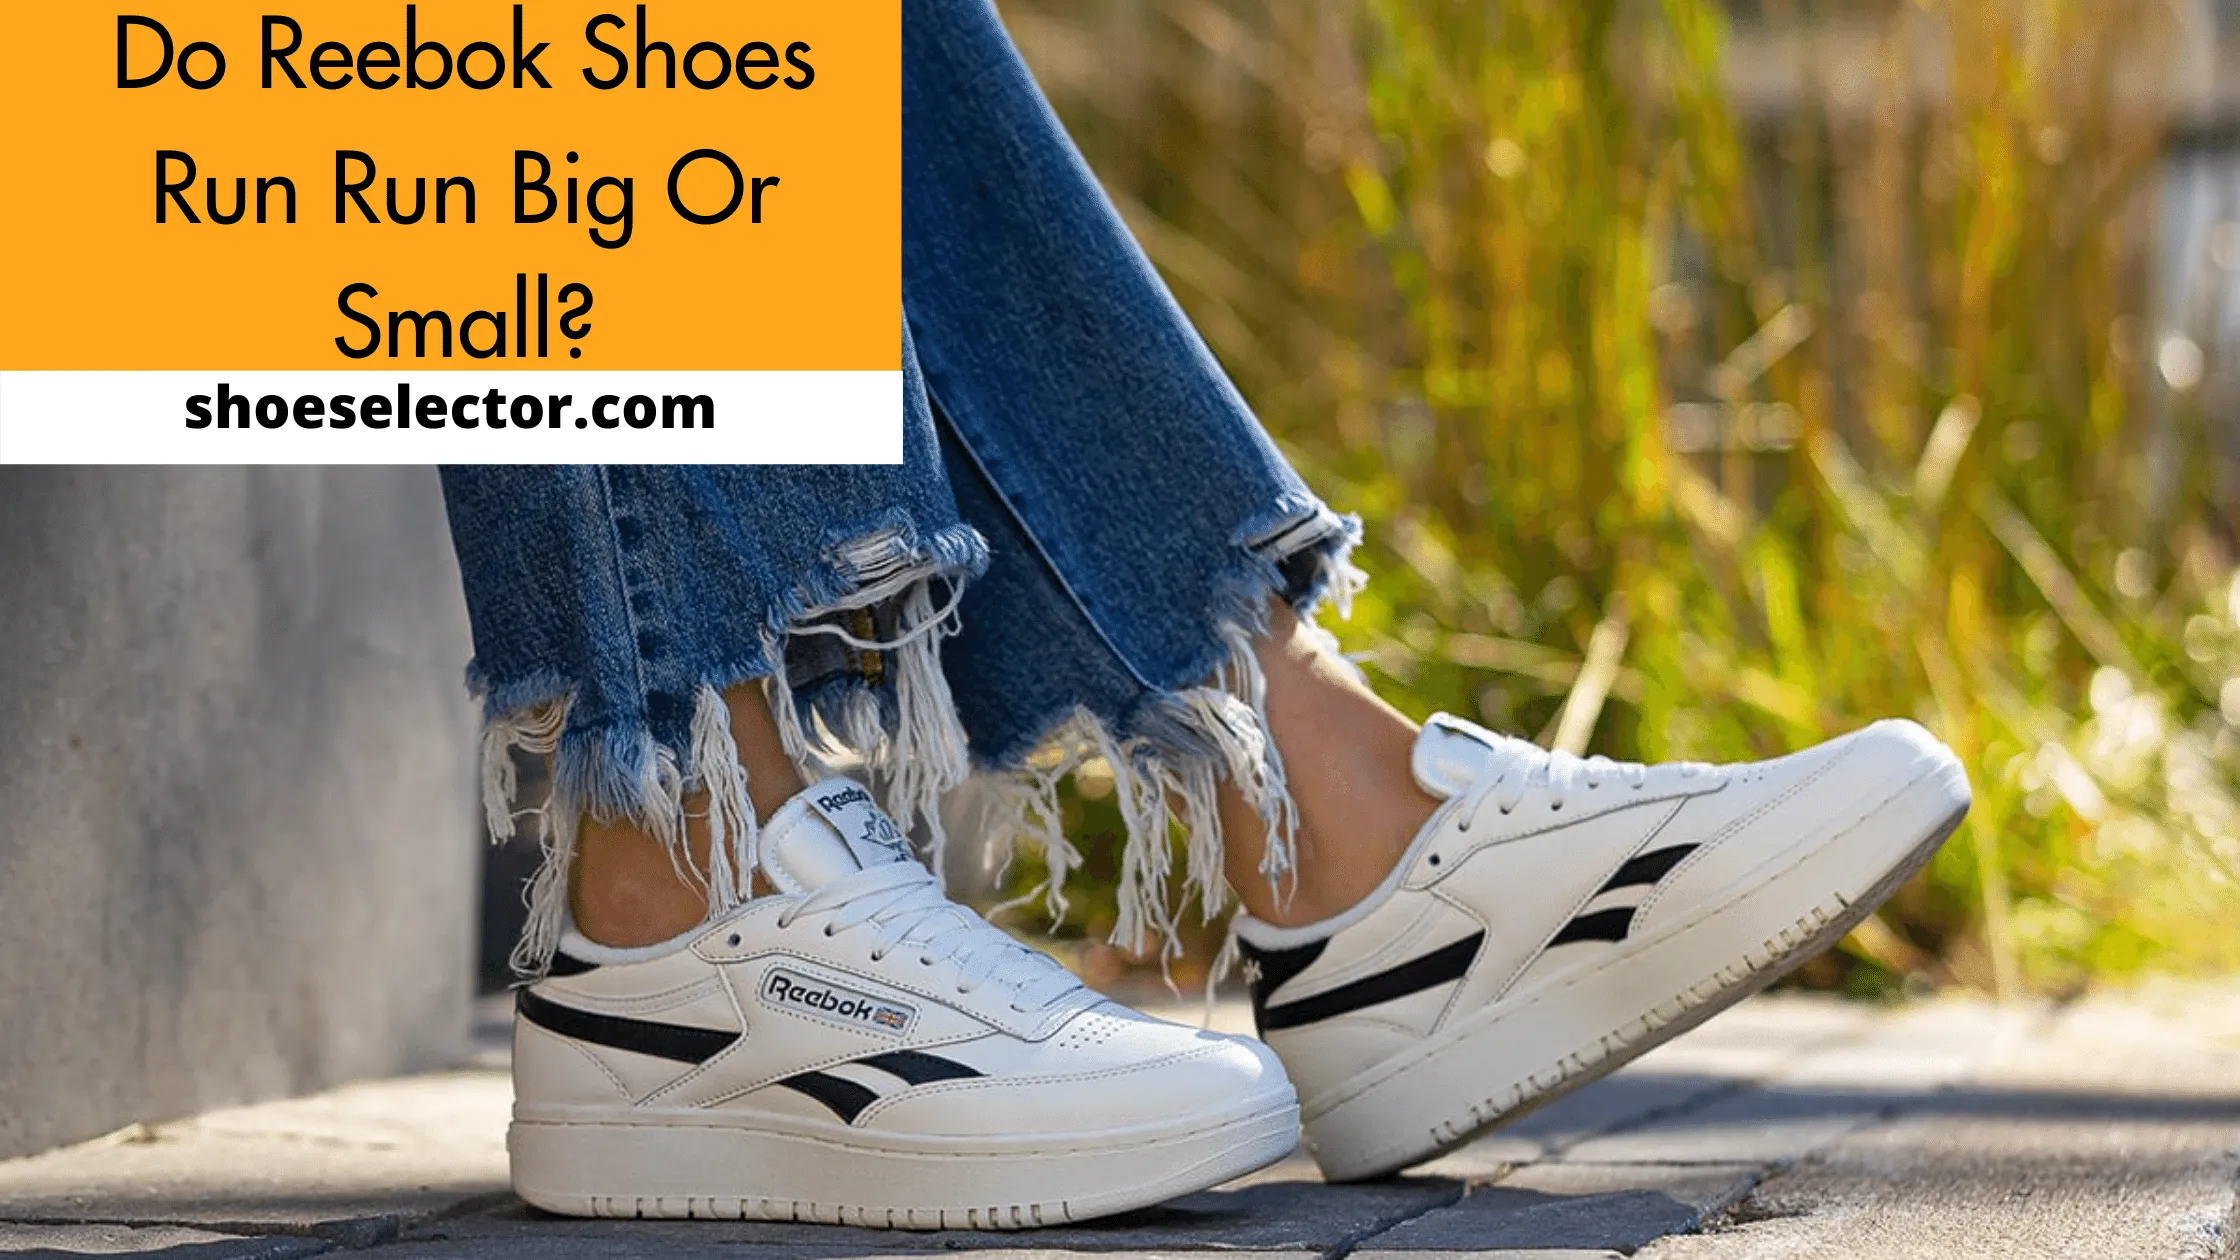 Do Reebok Shoes Run Big or Small? Quick Guide